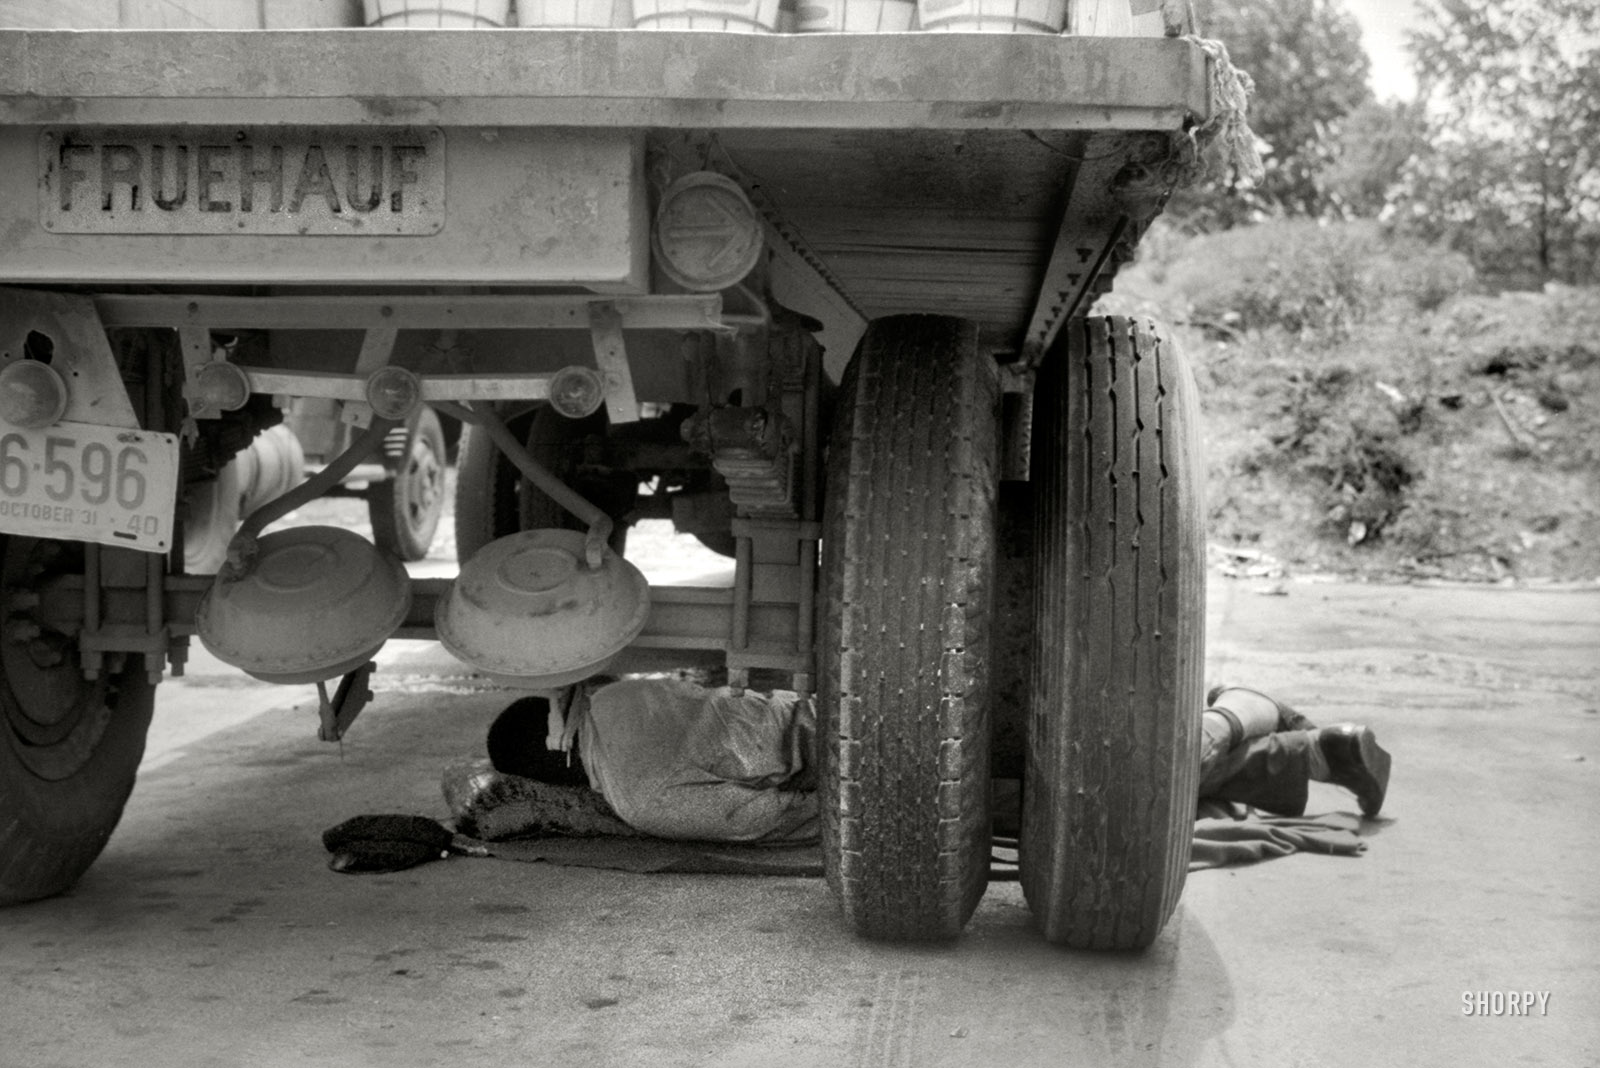 June 1940. Washington, D.C. "Negro driver asleep under a truck. There are no sleeping accommodations for Negroes at this service station on U.S. 1." Photo by Jack Delano for the Farm Security Administration. View full size.